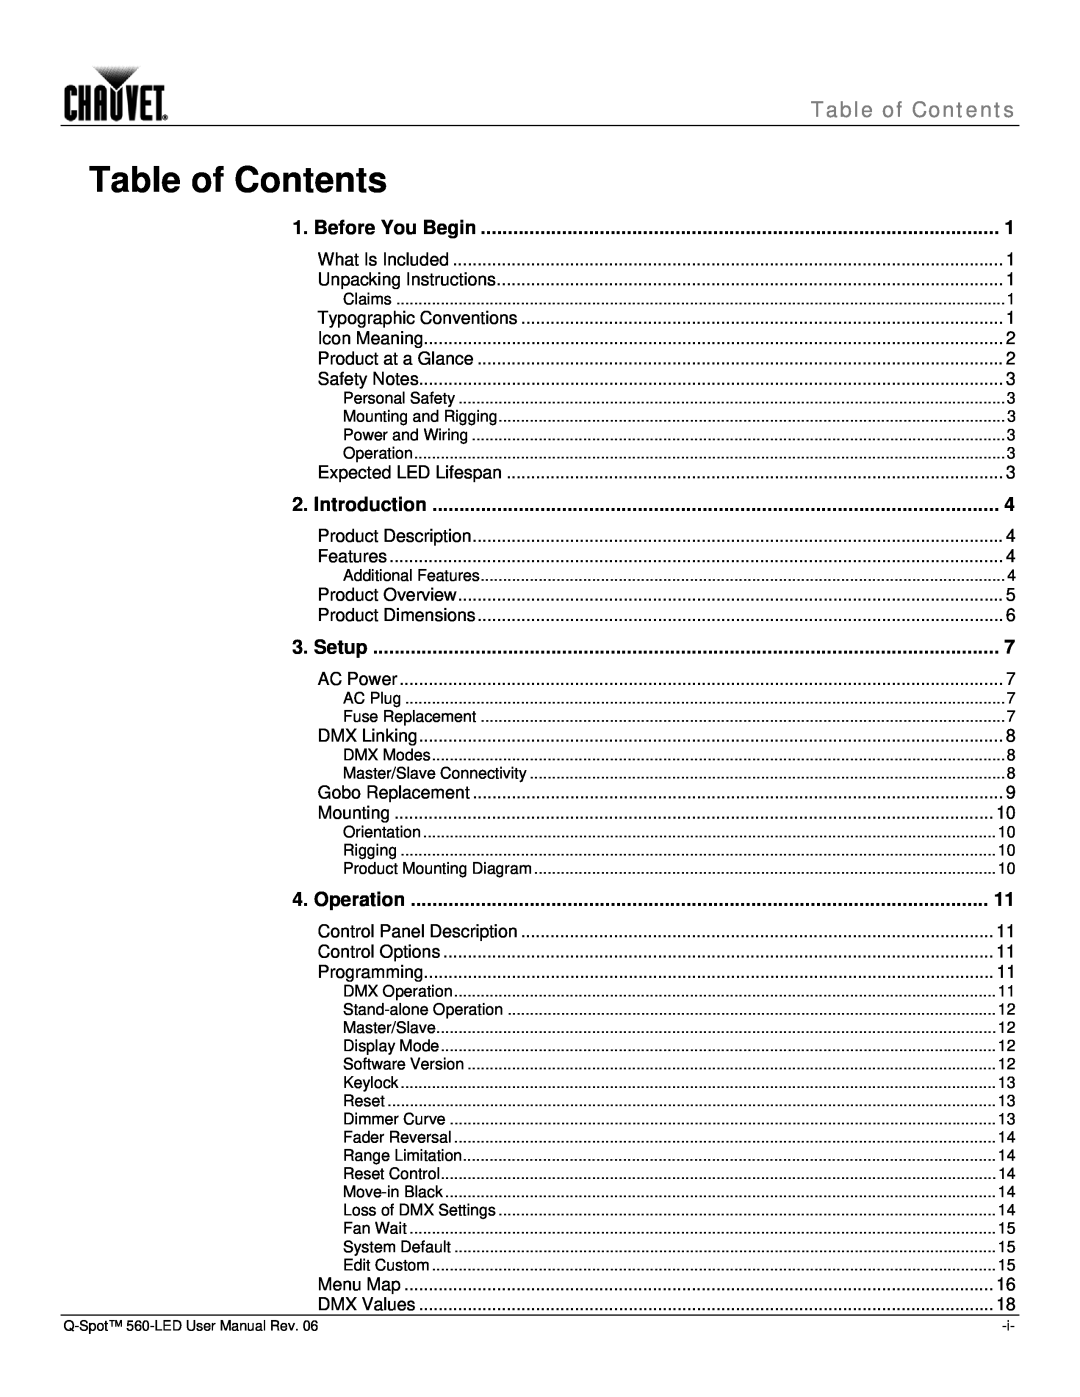 Chauvet 560 user manual Table of Contents, Before You Begin, Introduction, Setup 